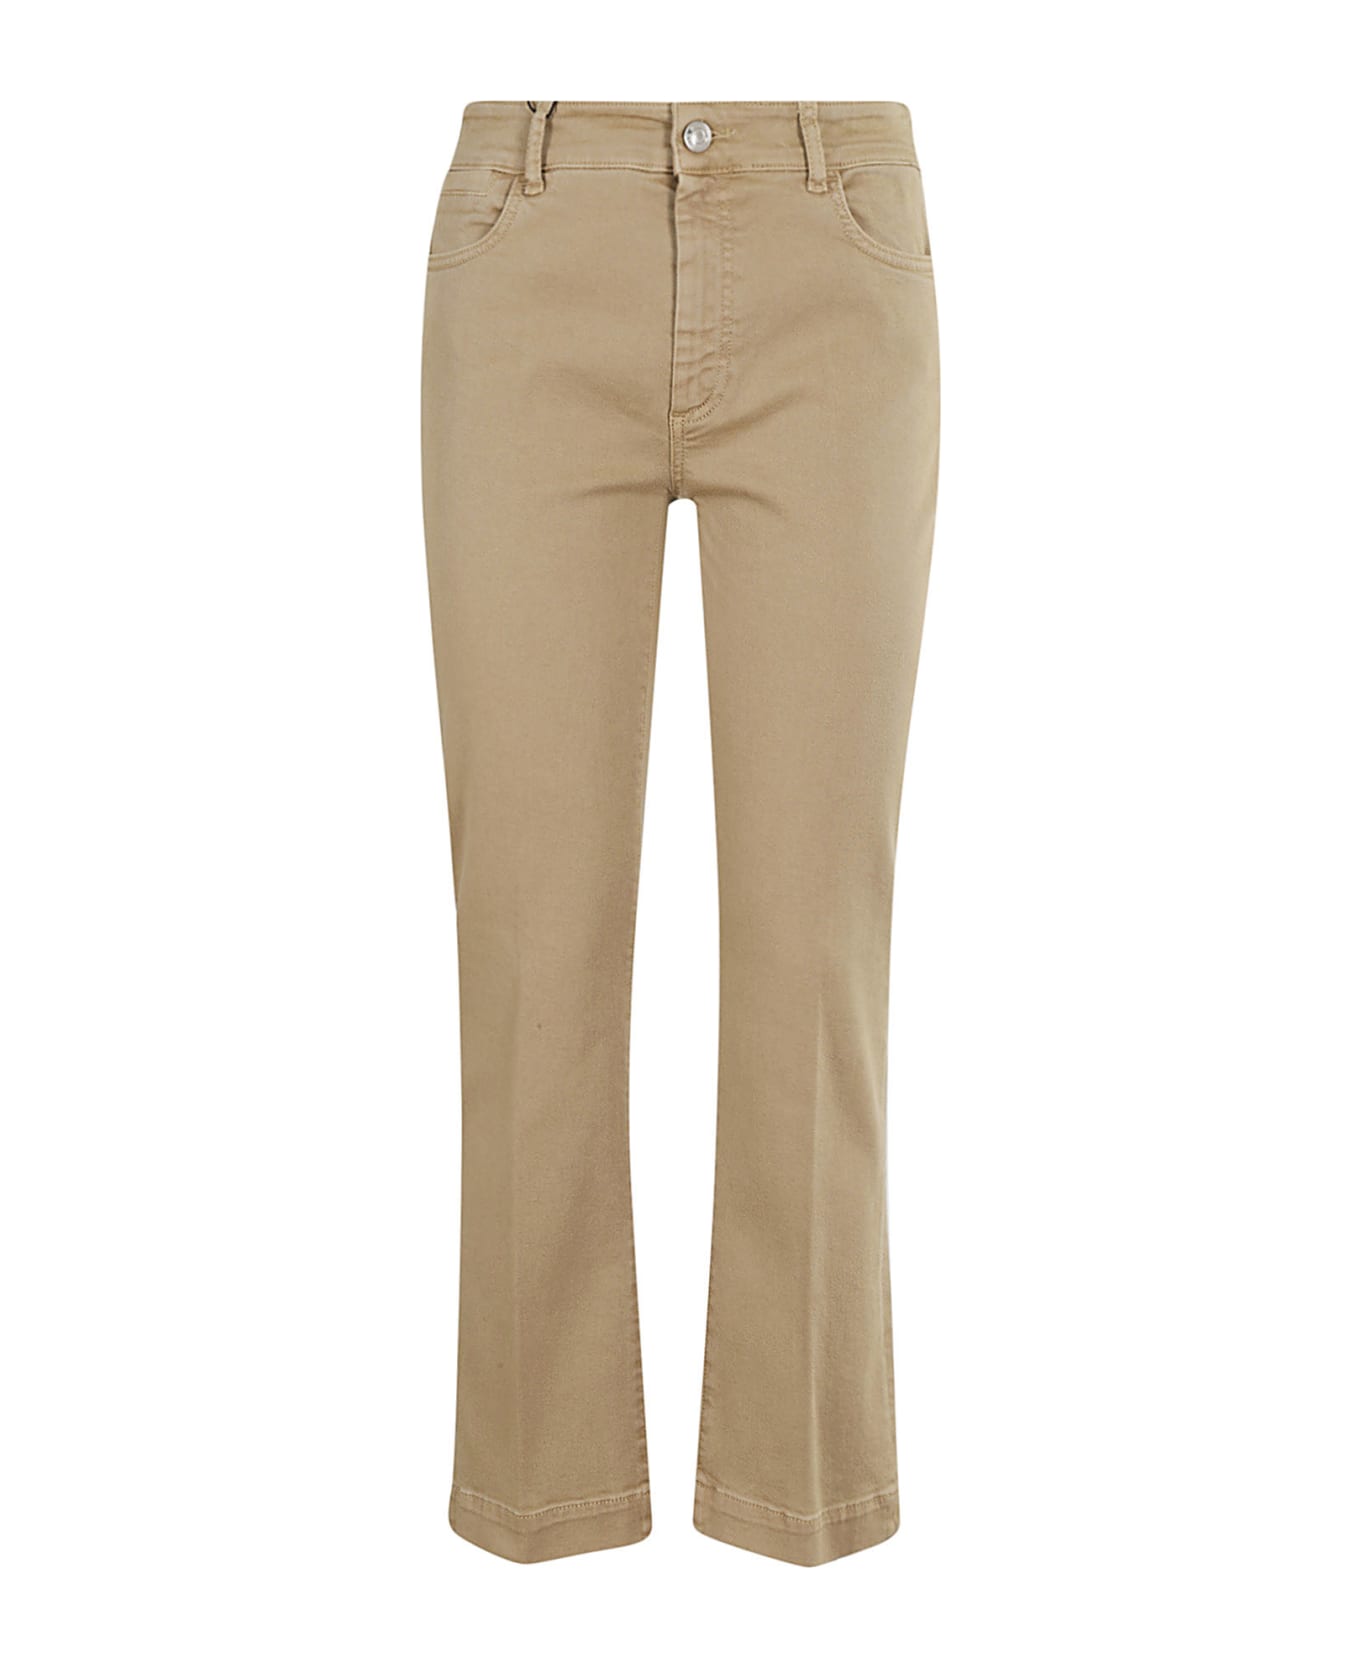 SportMax Nilly Jeans - Cammello